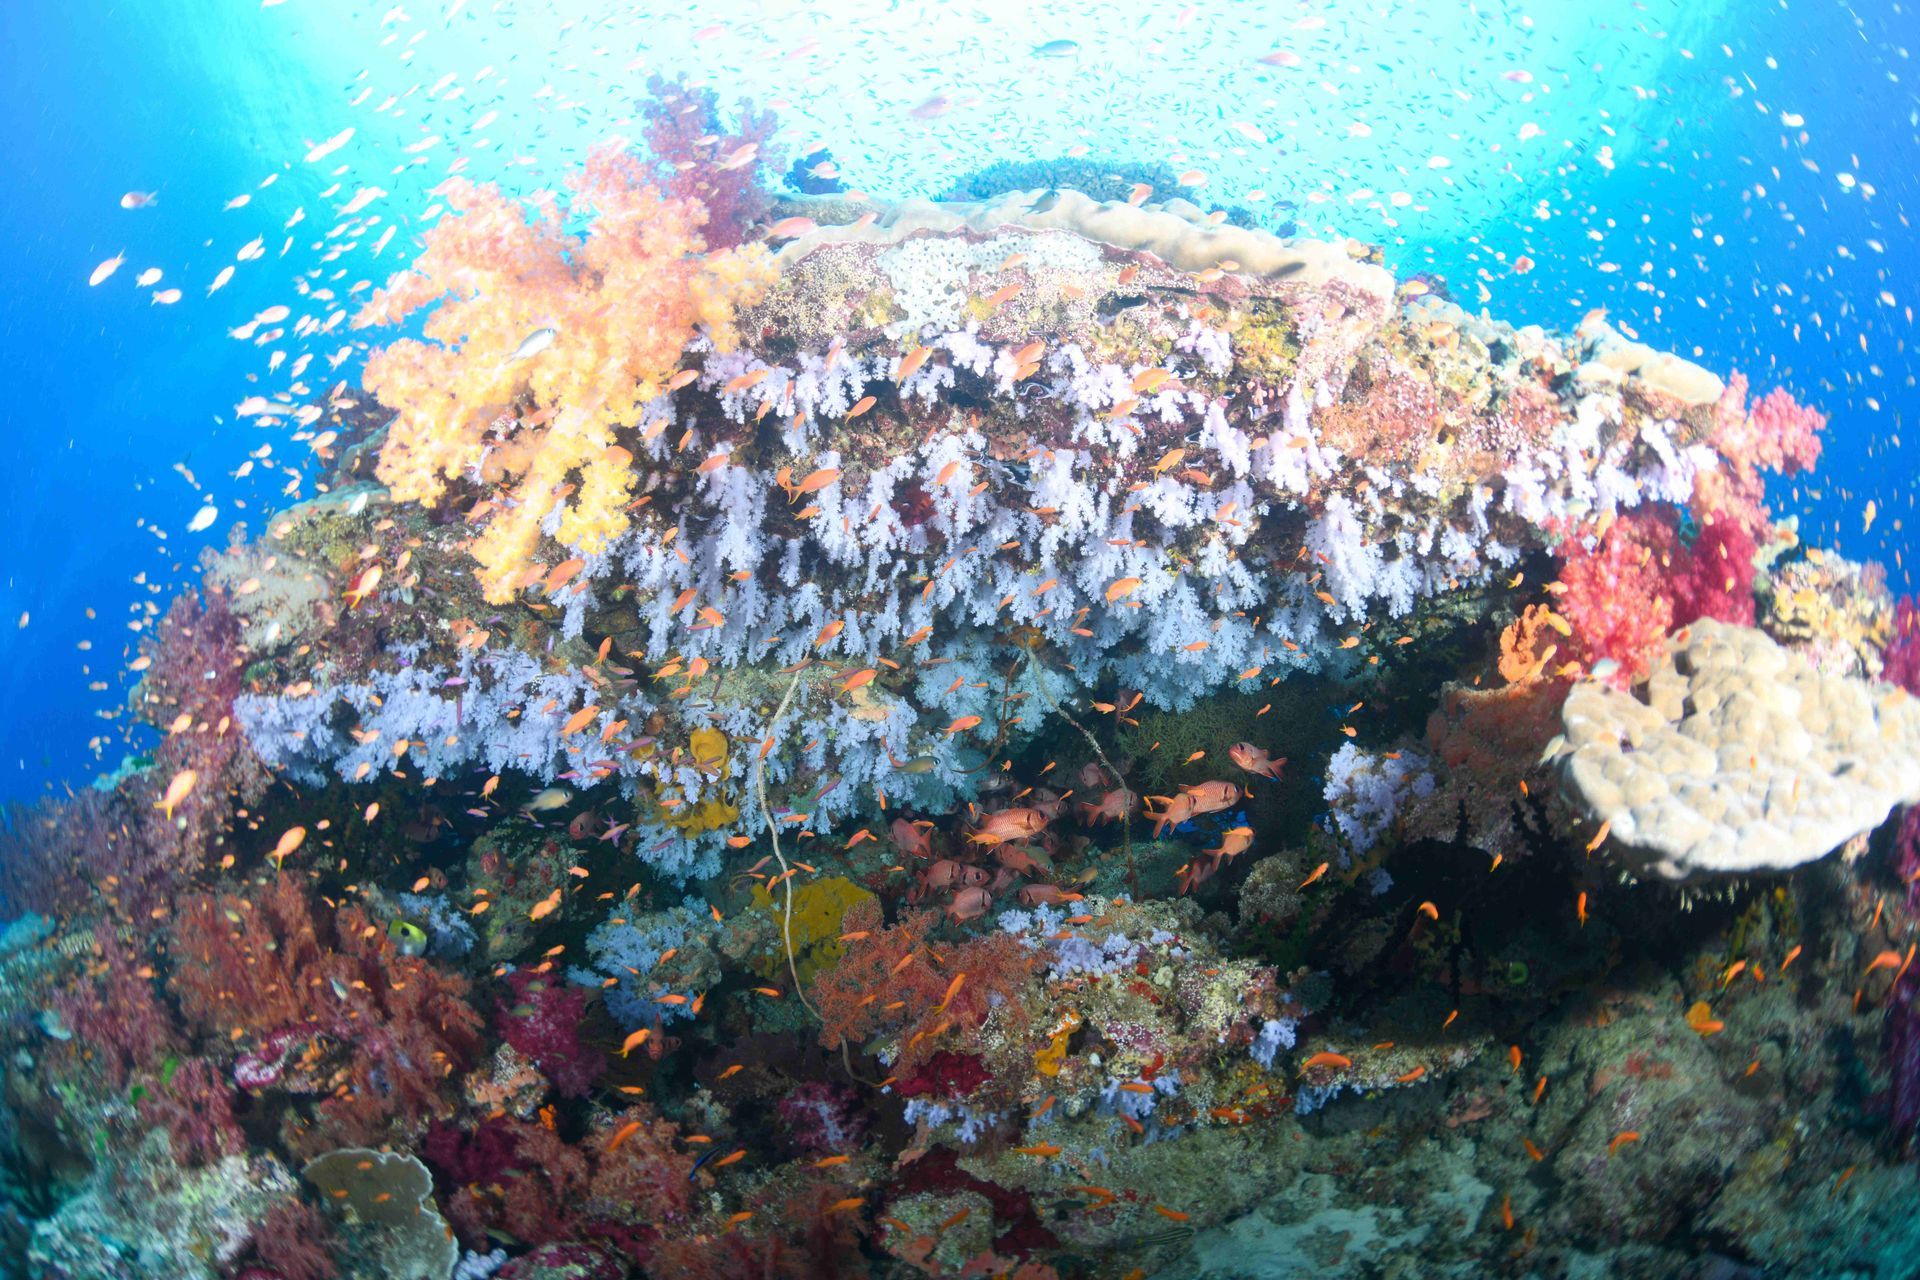 A beautiful  coral reef with white soft corals dropping from a hard coral dome shape mingled with red and pink corals and red reef fish on Rainbow Reef in Fiji 